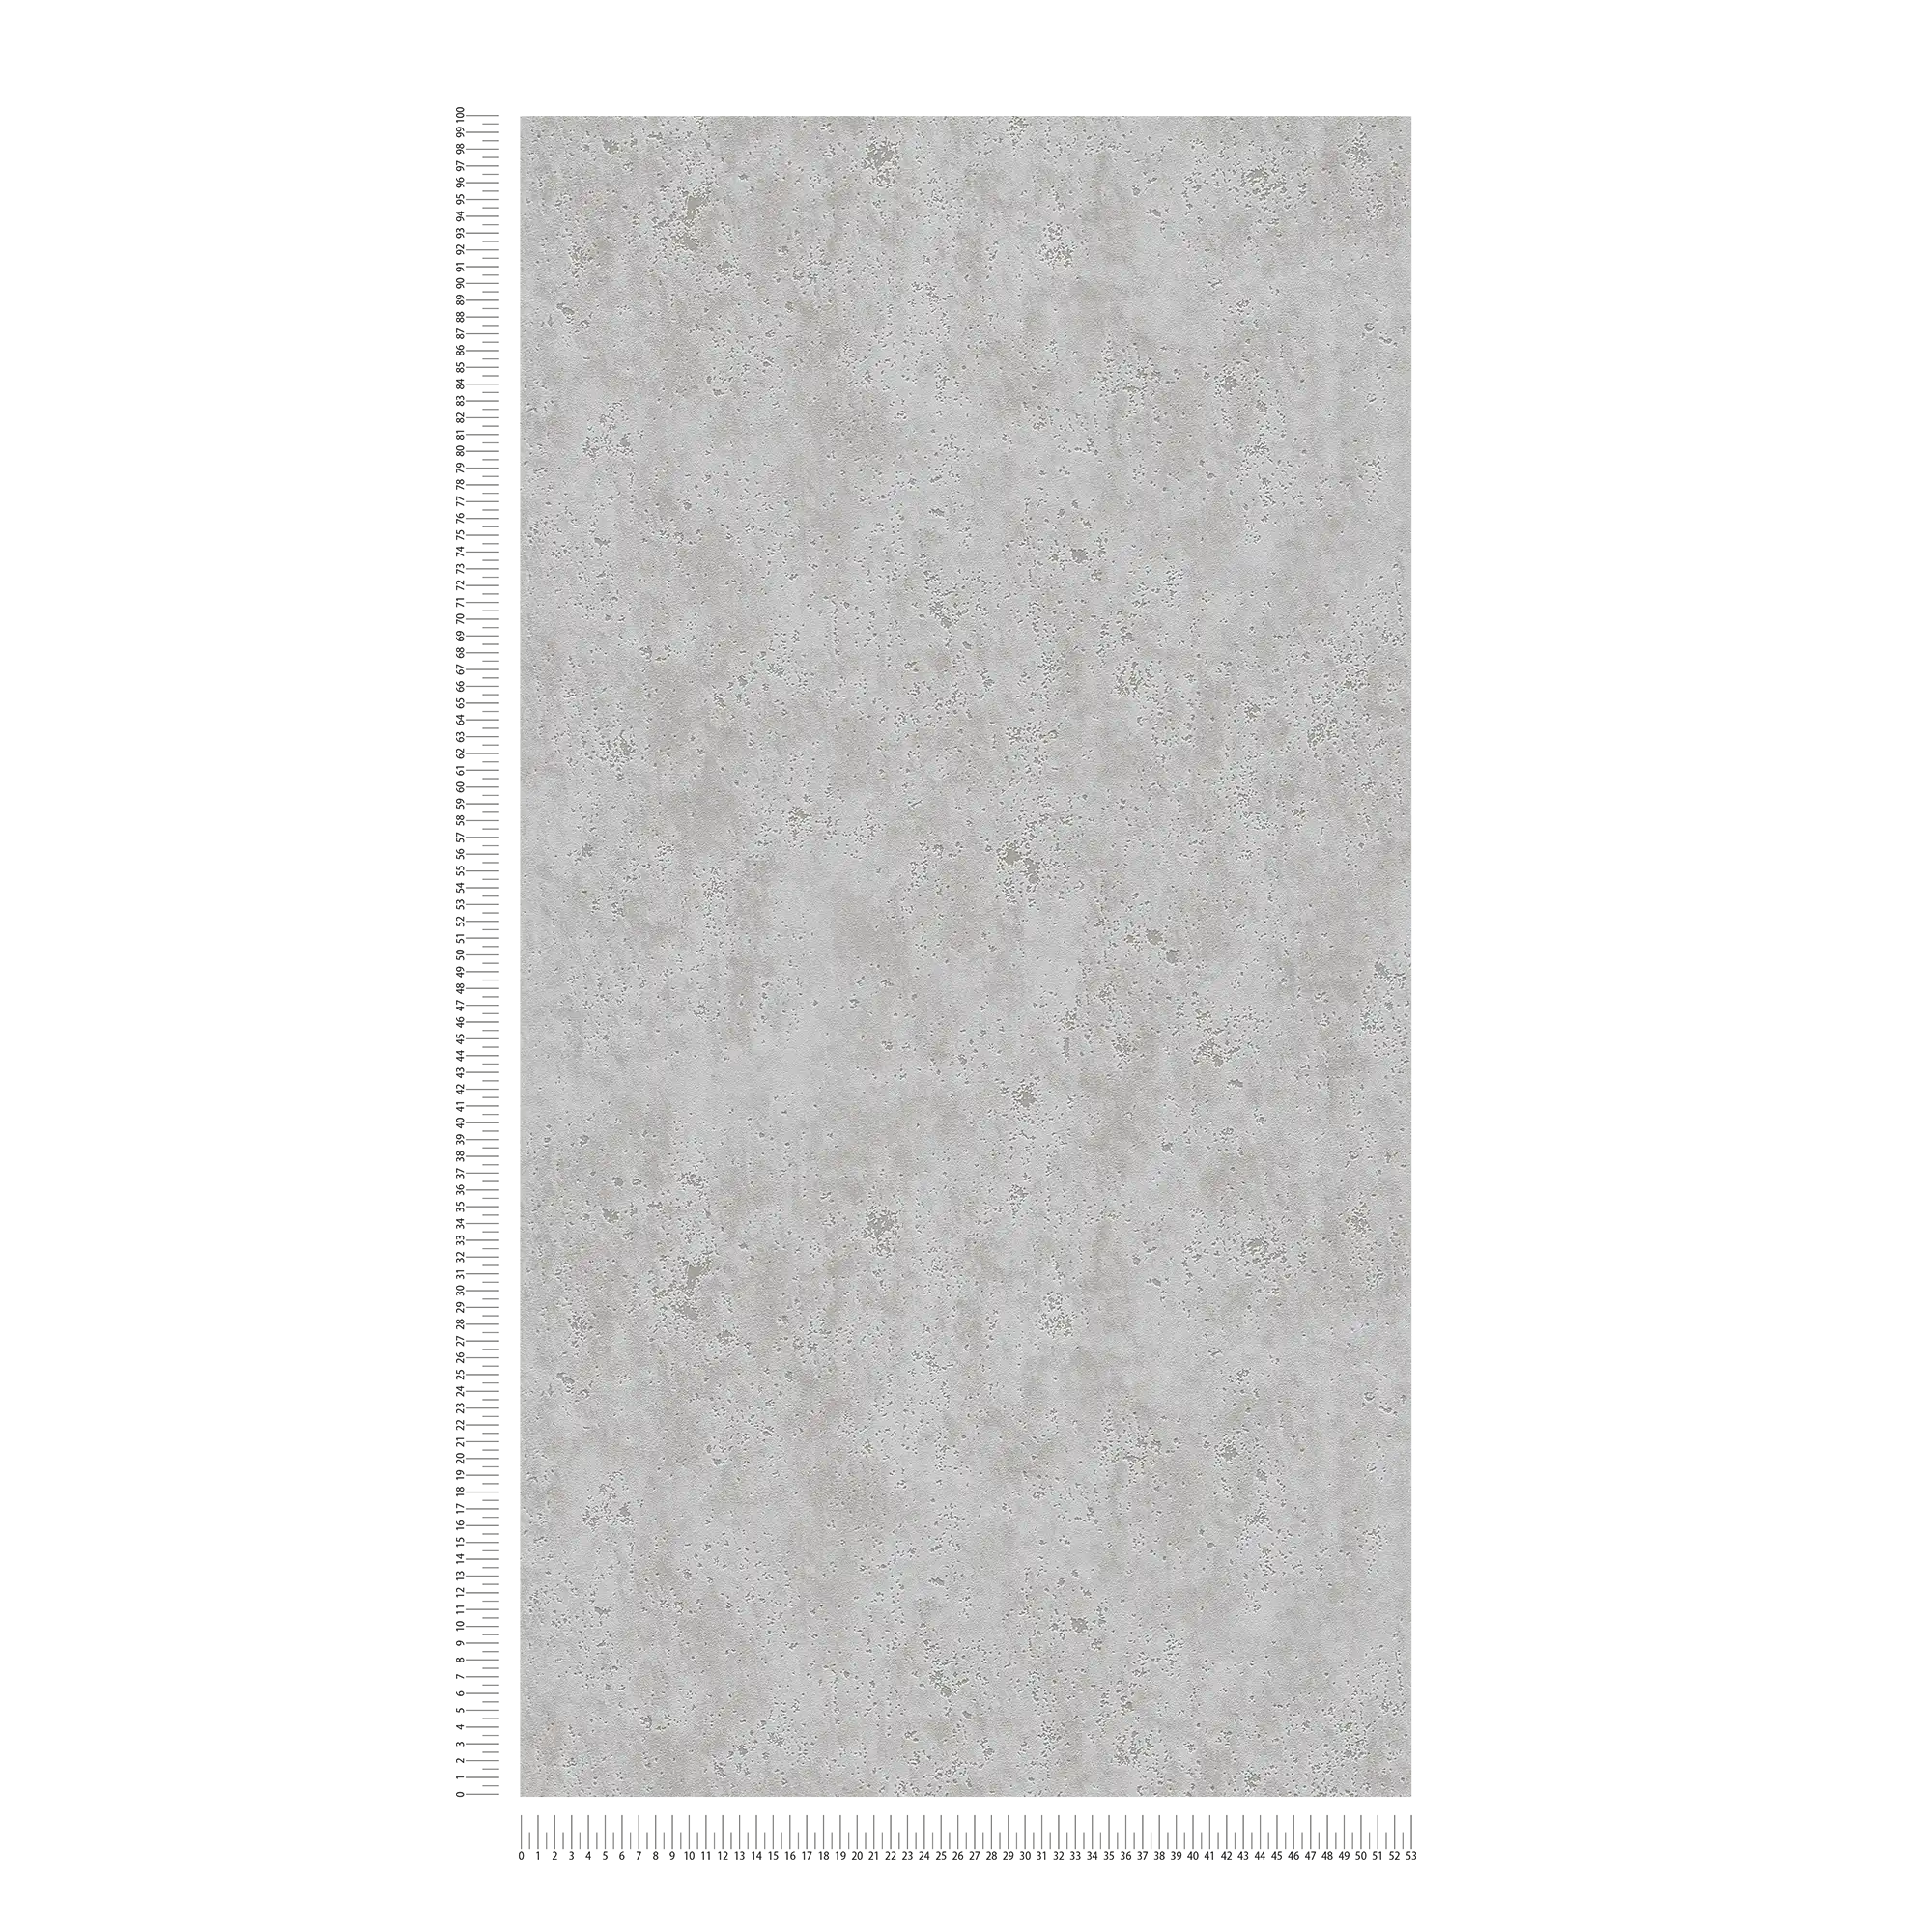             Wallpaper plaster look with rough surface texture - grey
        